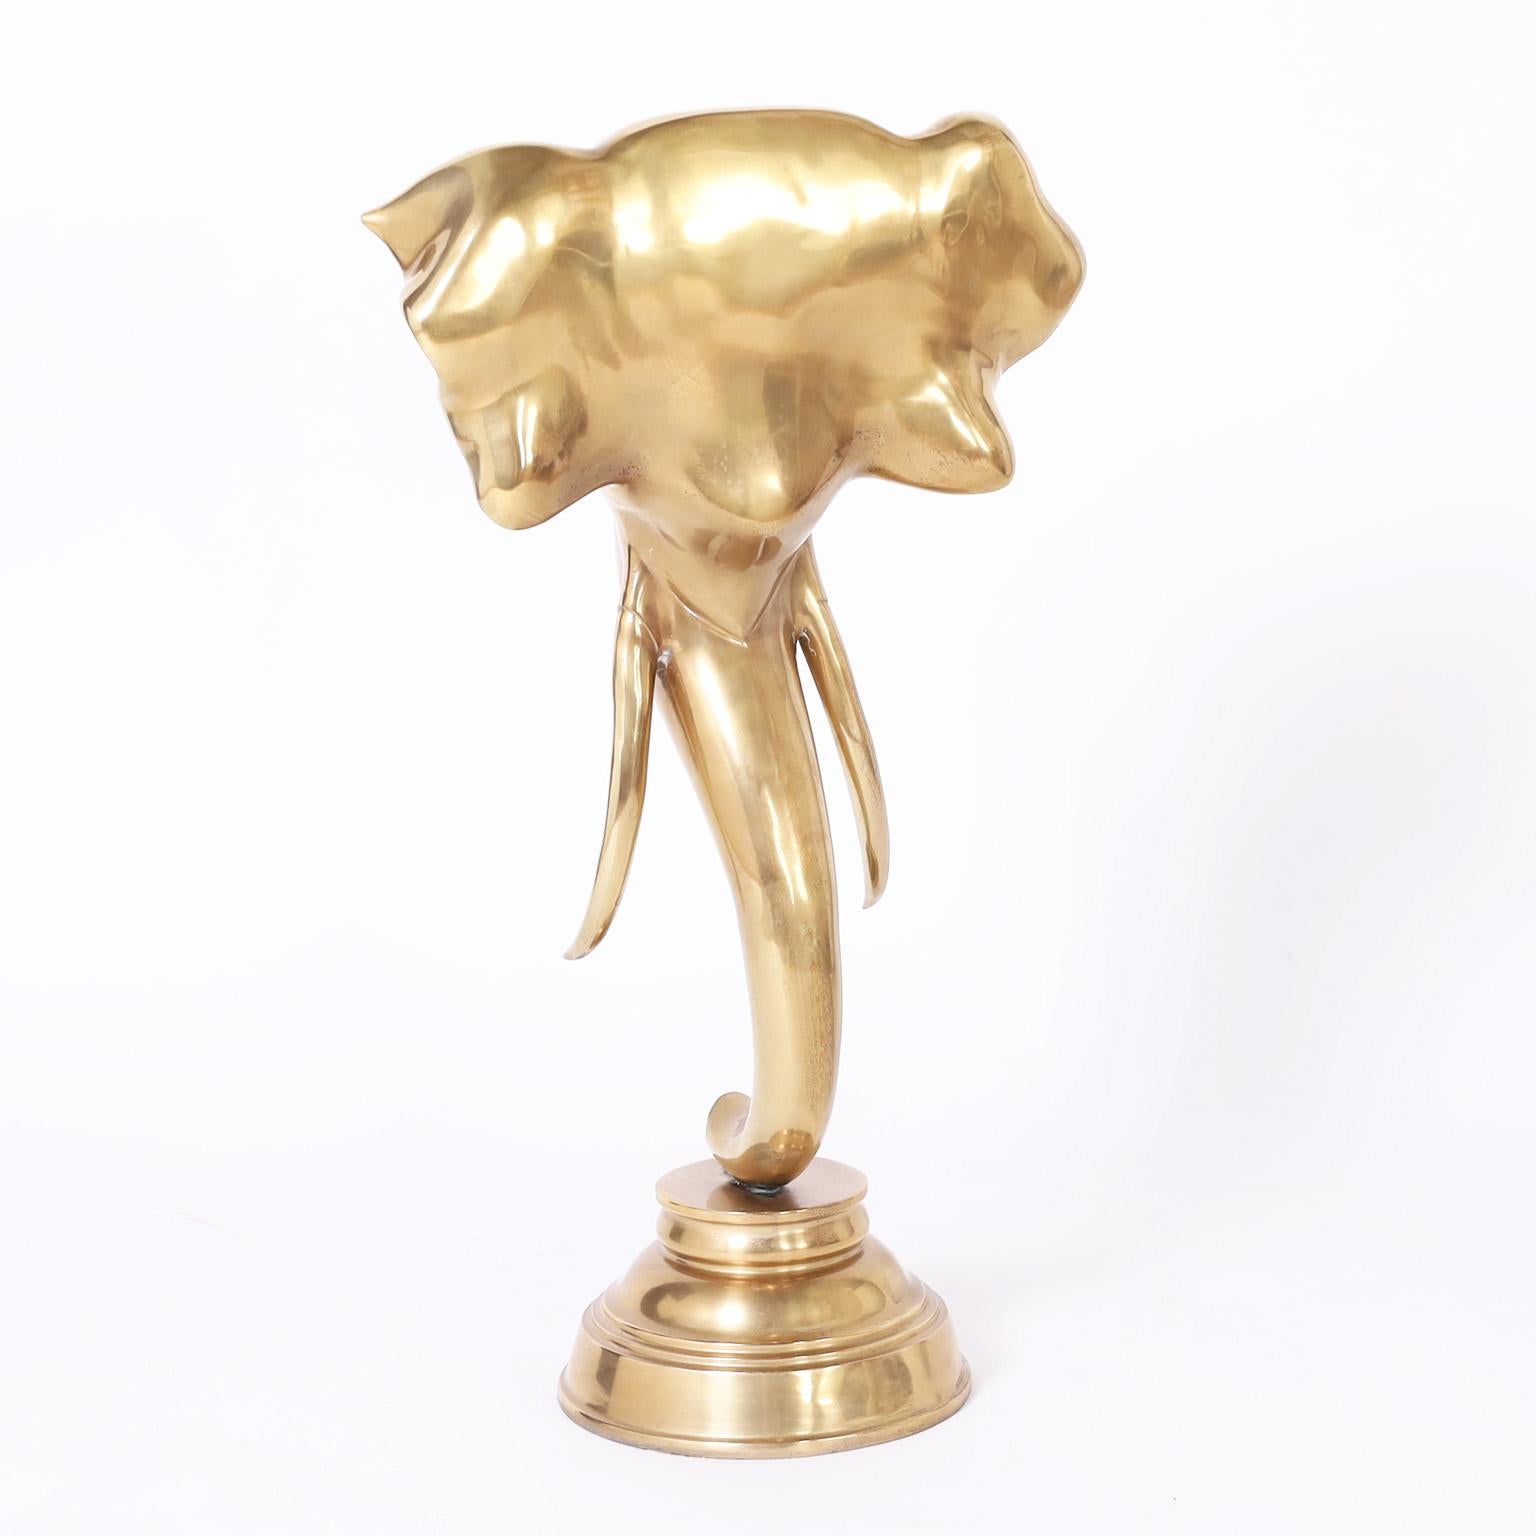 Standout Anglo Indian cast brass elephant head sculpture presented on a turned brass stand. Hand polished and lacquered for easy care.